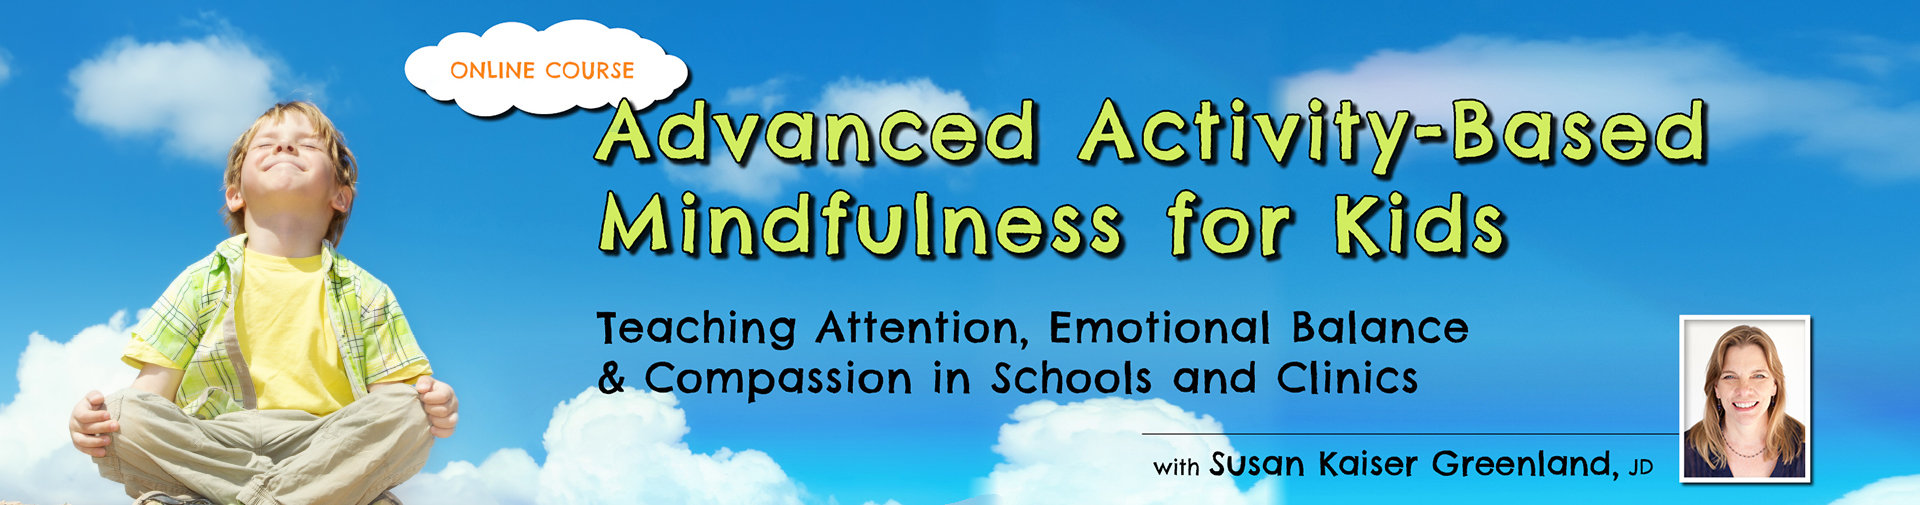 Advanced Activity-Based Mindfulness for Kids